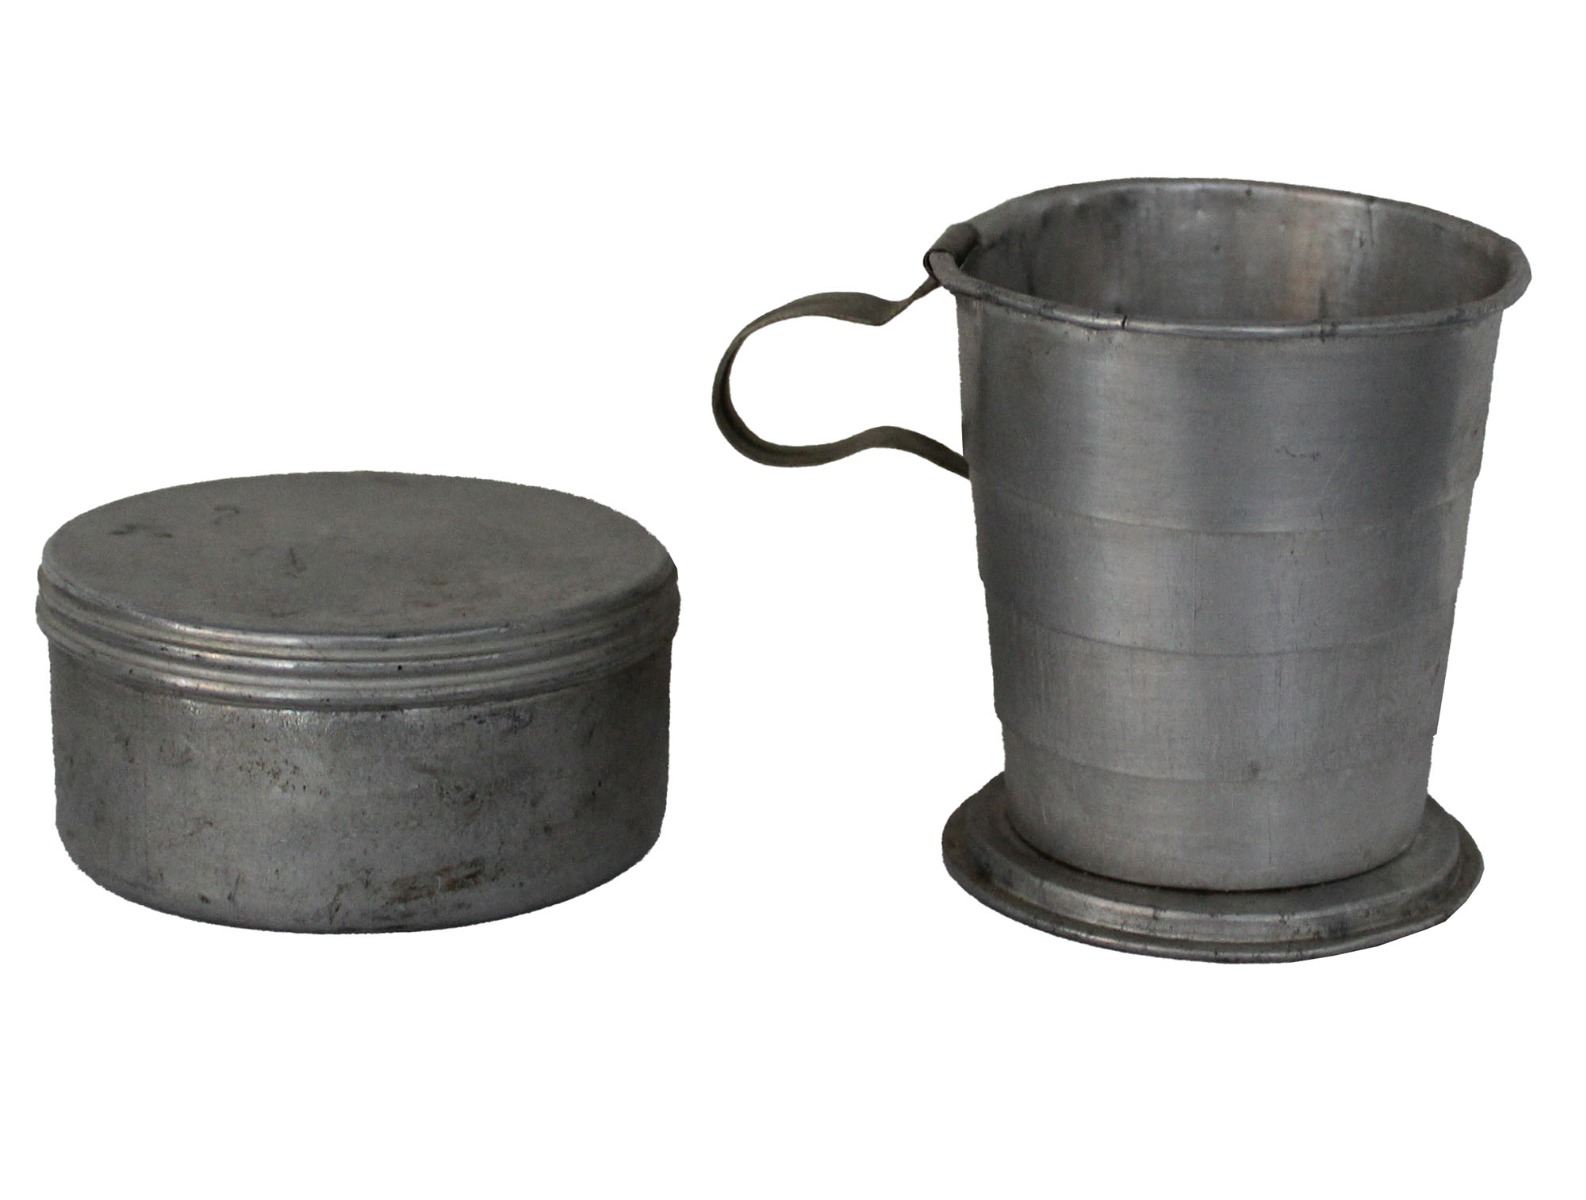 WW2 CANADIAN COLLAPSIBLE METAL CUP WITH HANDLE AND LID